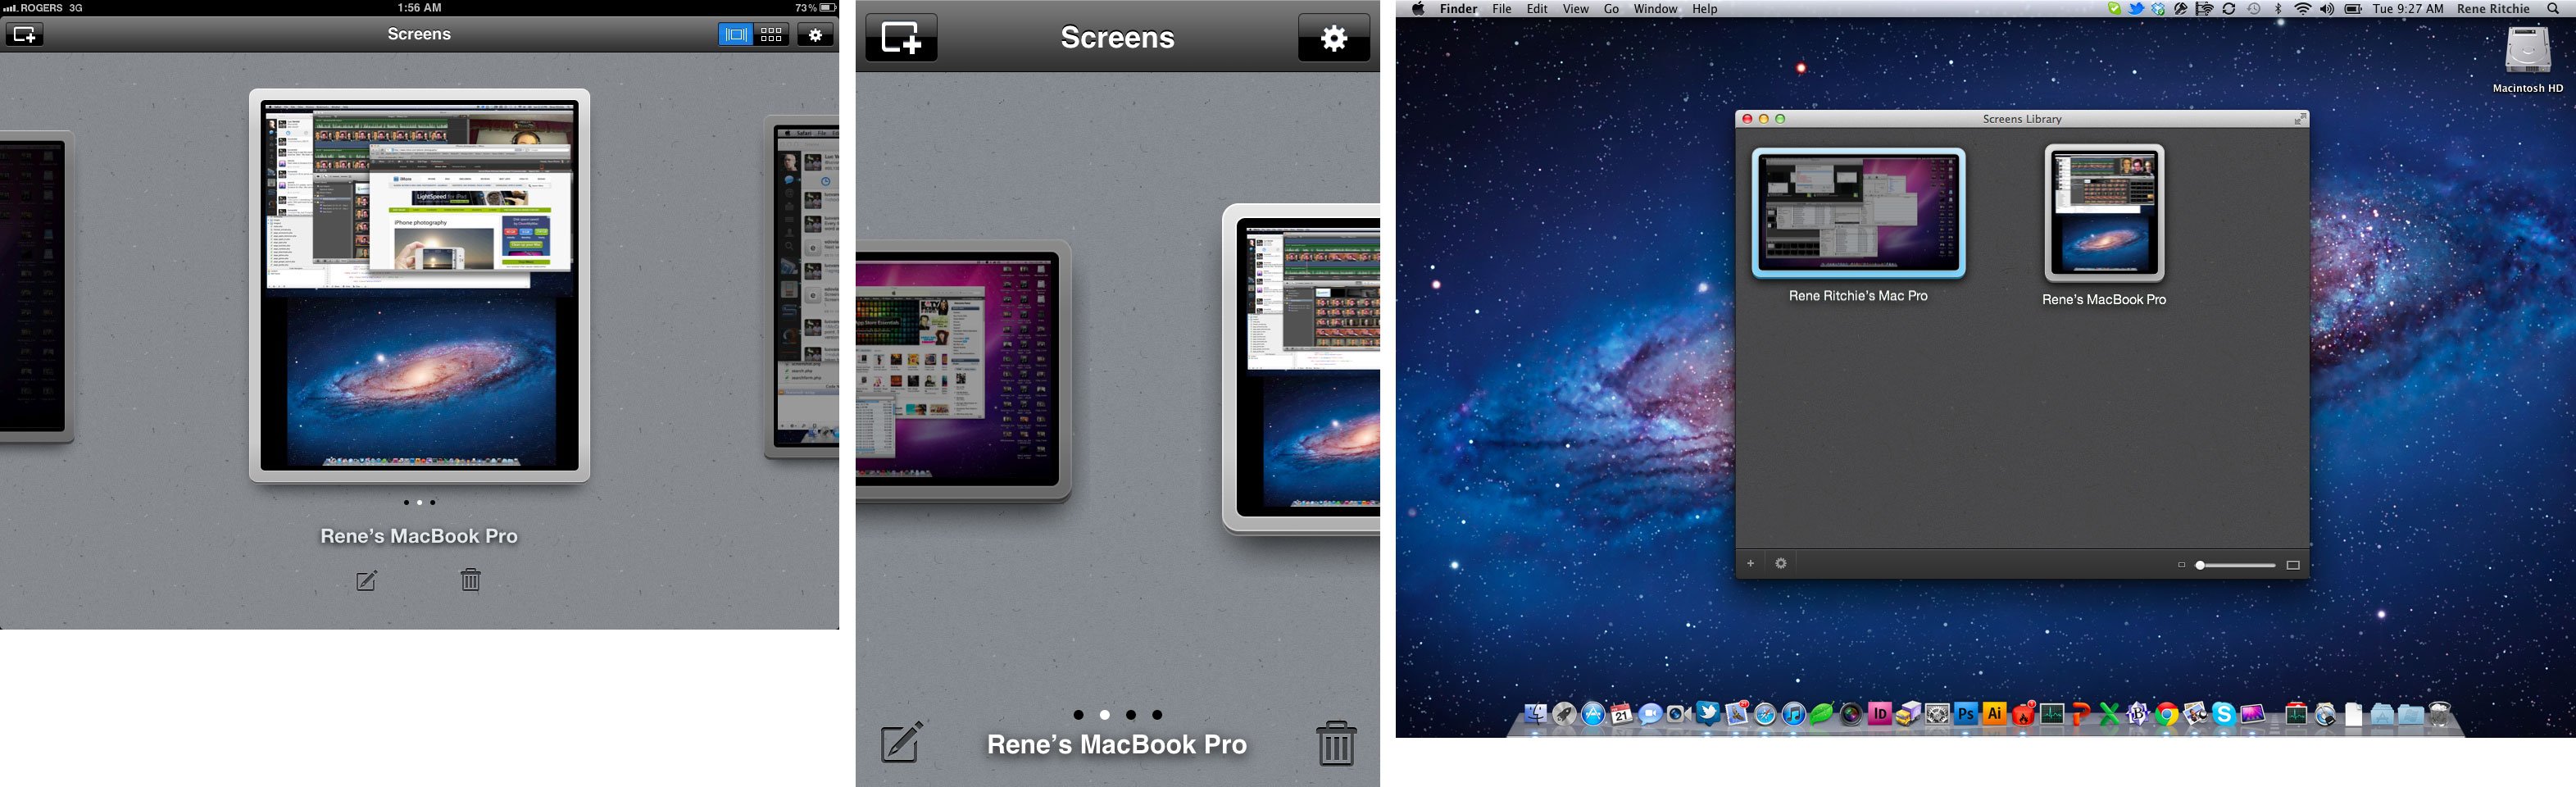 Screens is a universal binary for iPhone, iPod touch, and iPad, and a separate app for Mac